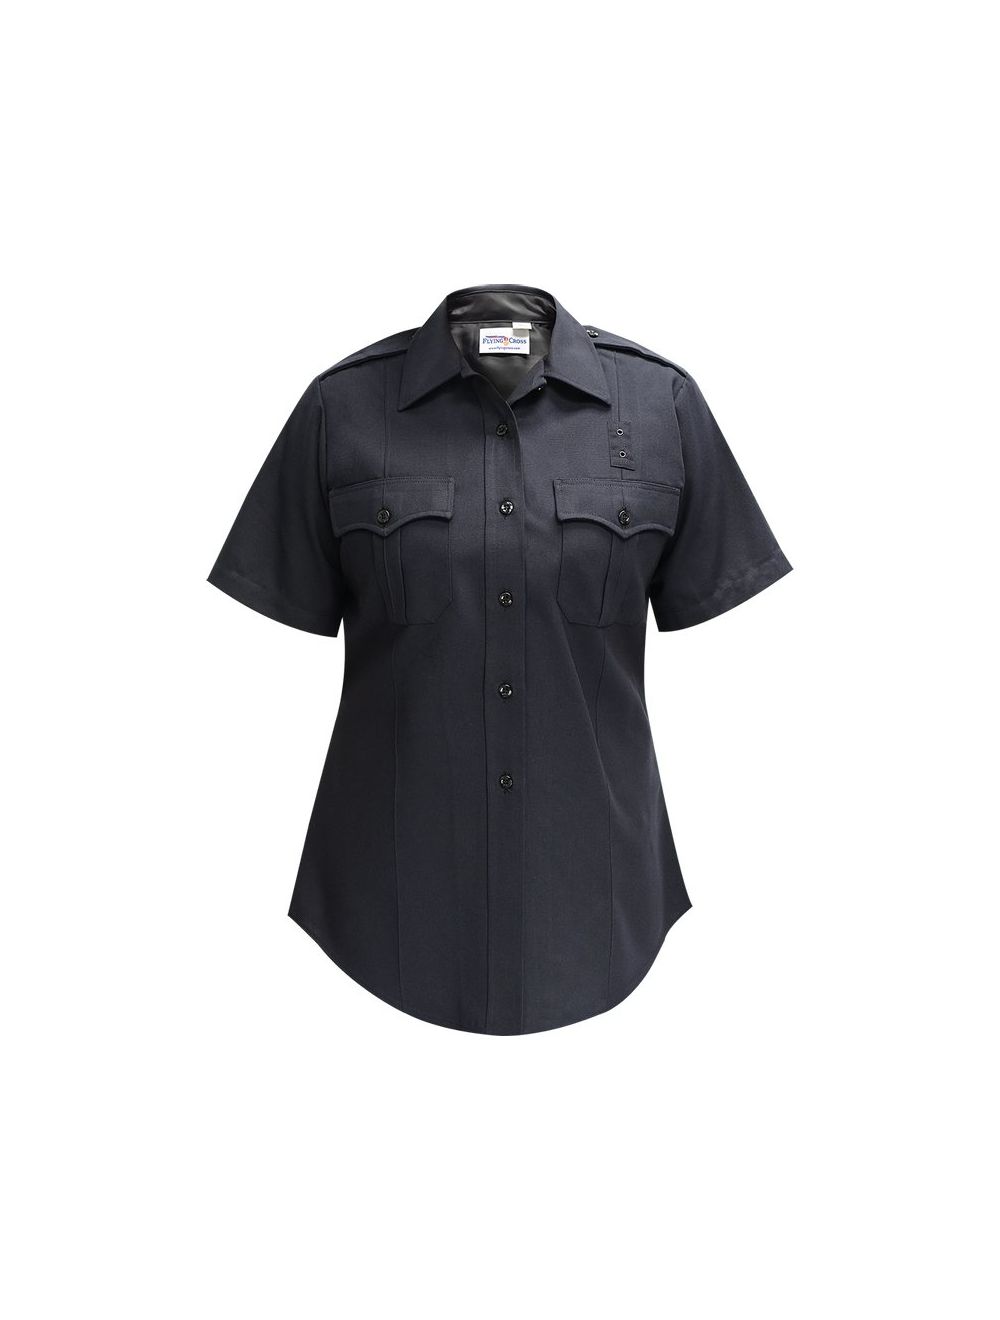 Flying Cross Justice Women's Short Sleeve Uniform Shirt 75% Poly/25% Wool - LAPD Navy 157R84 - Newest Products